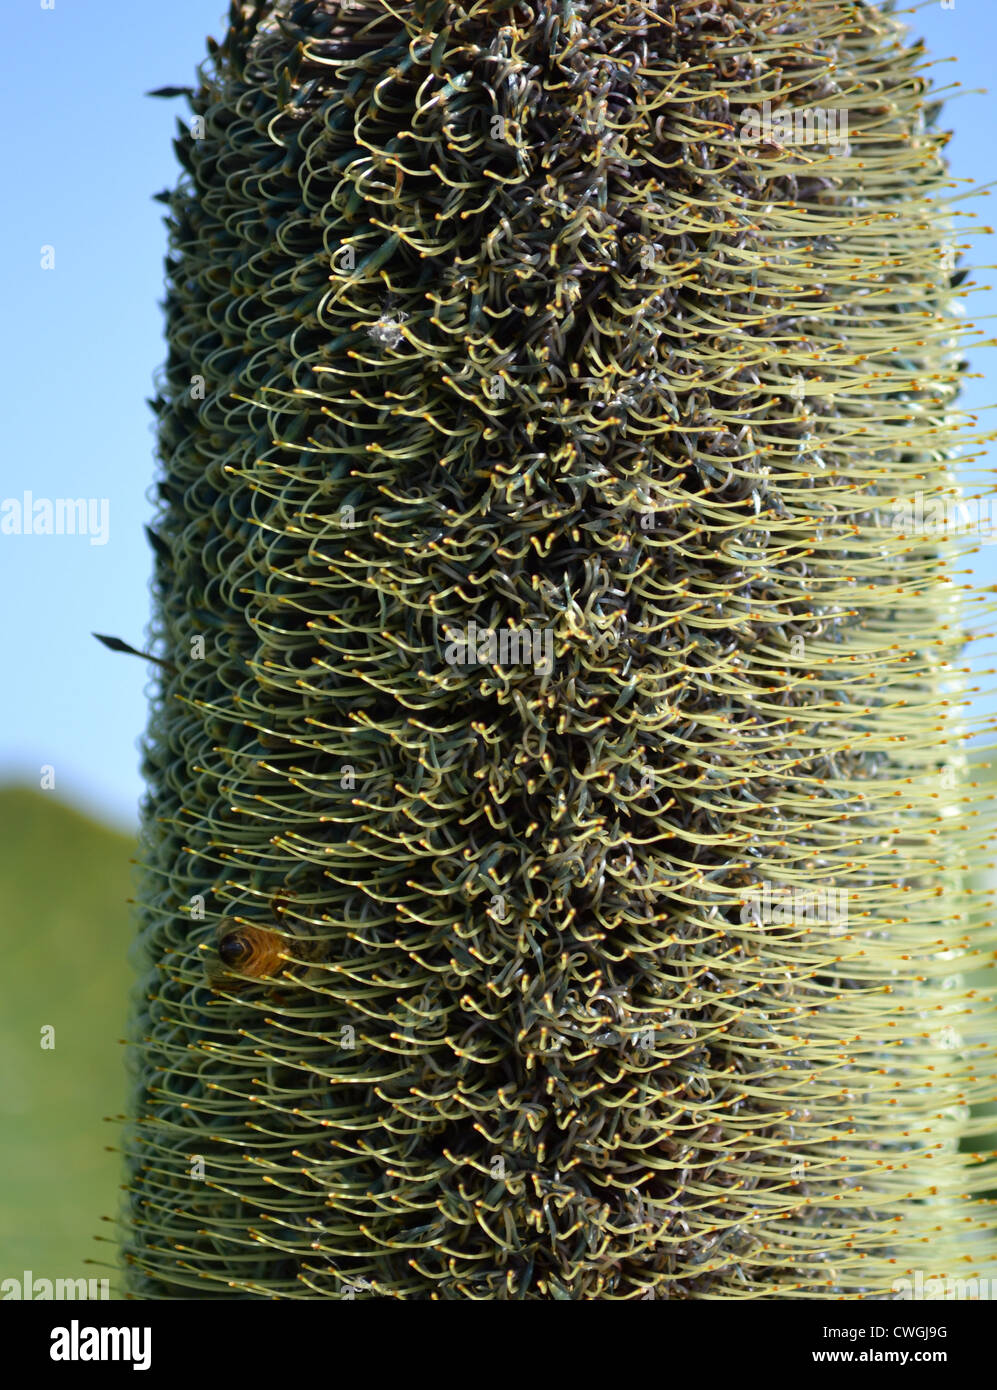 A Bee on a banksia flower Stock Photo